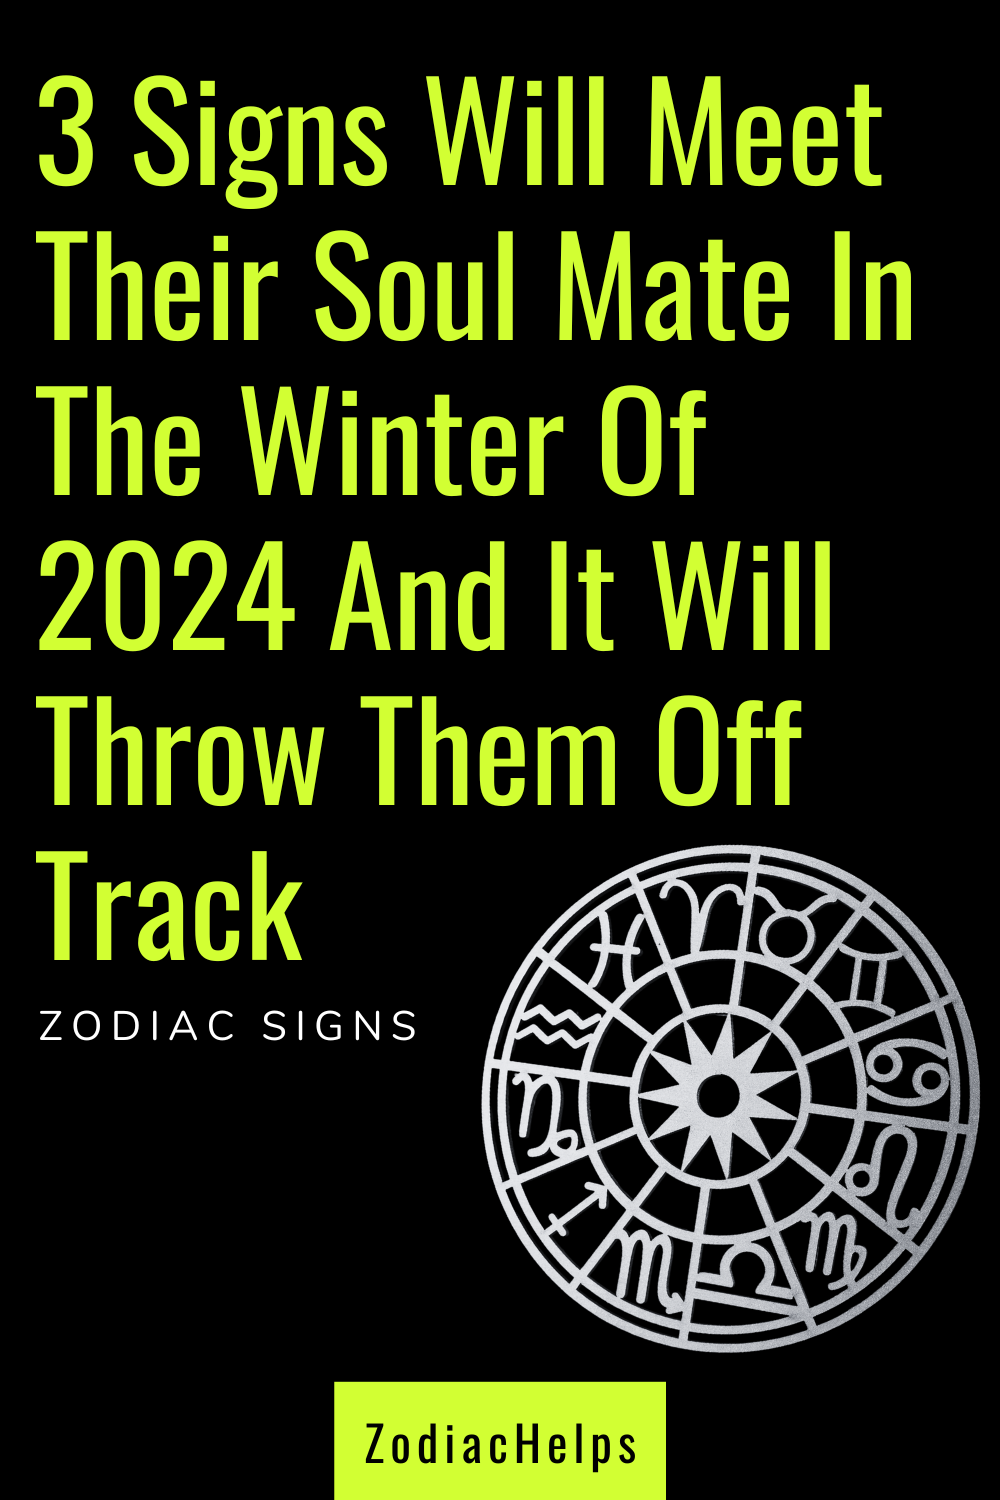 3 Signs Will Meet Their Soul Mate In The Winter Of 2024 And It Will Throw Them Off Track